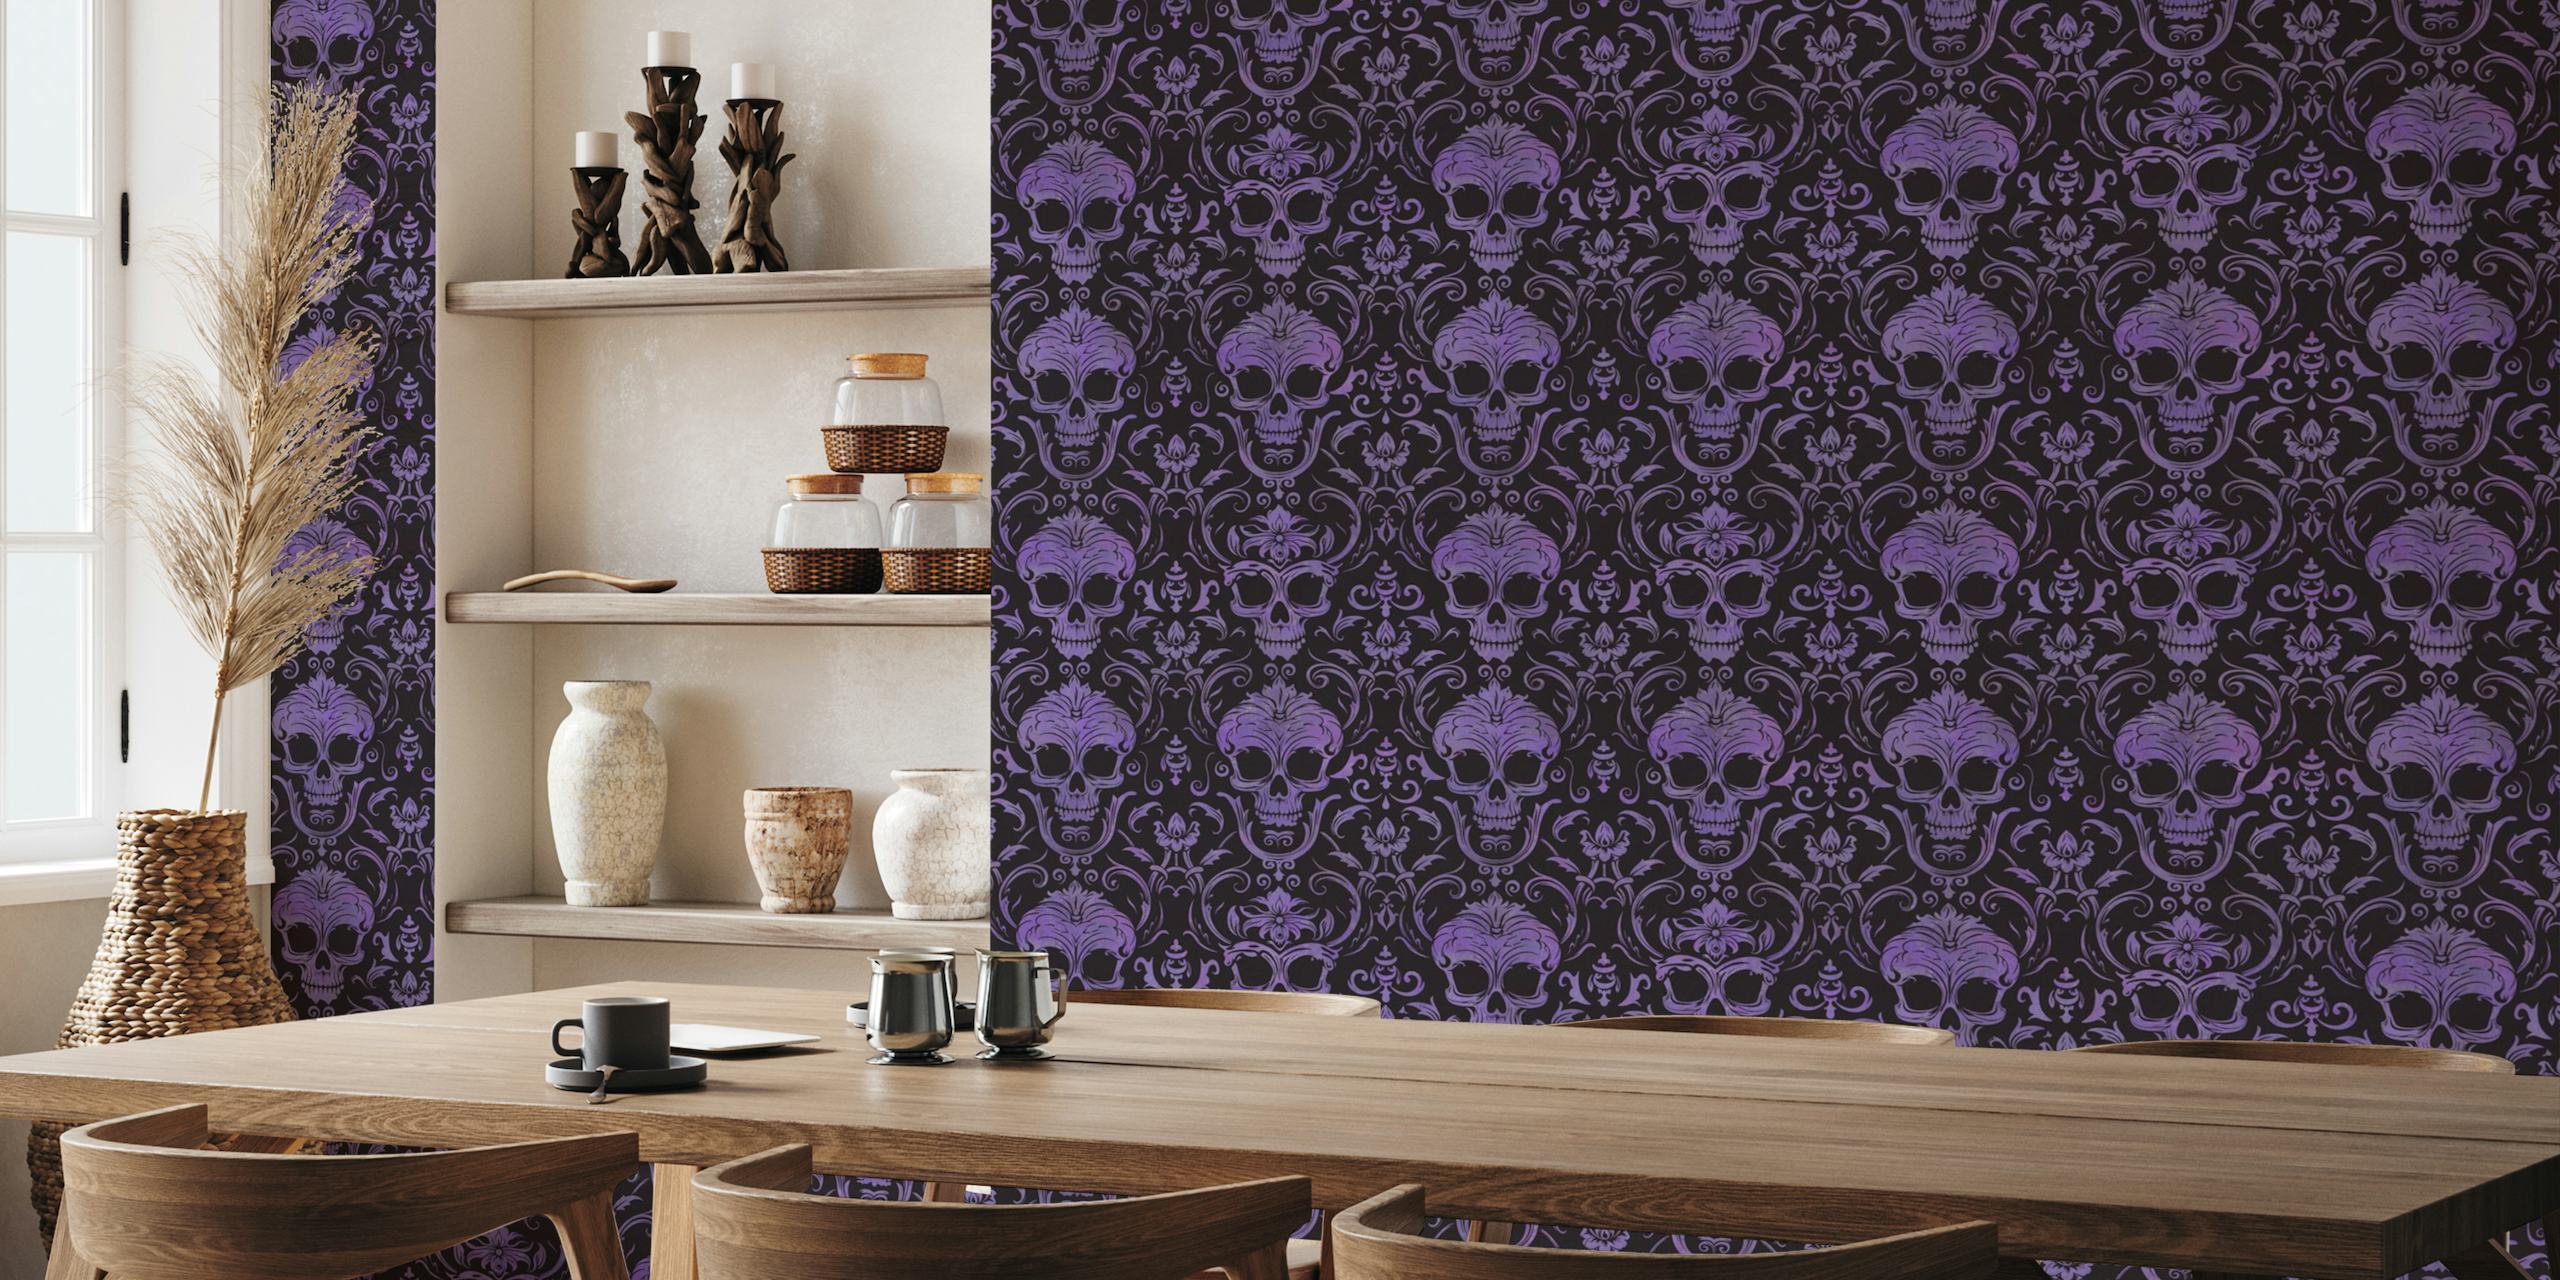 Gothic skull damask pattern on purple background wall mural